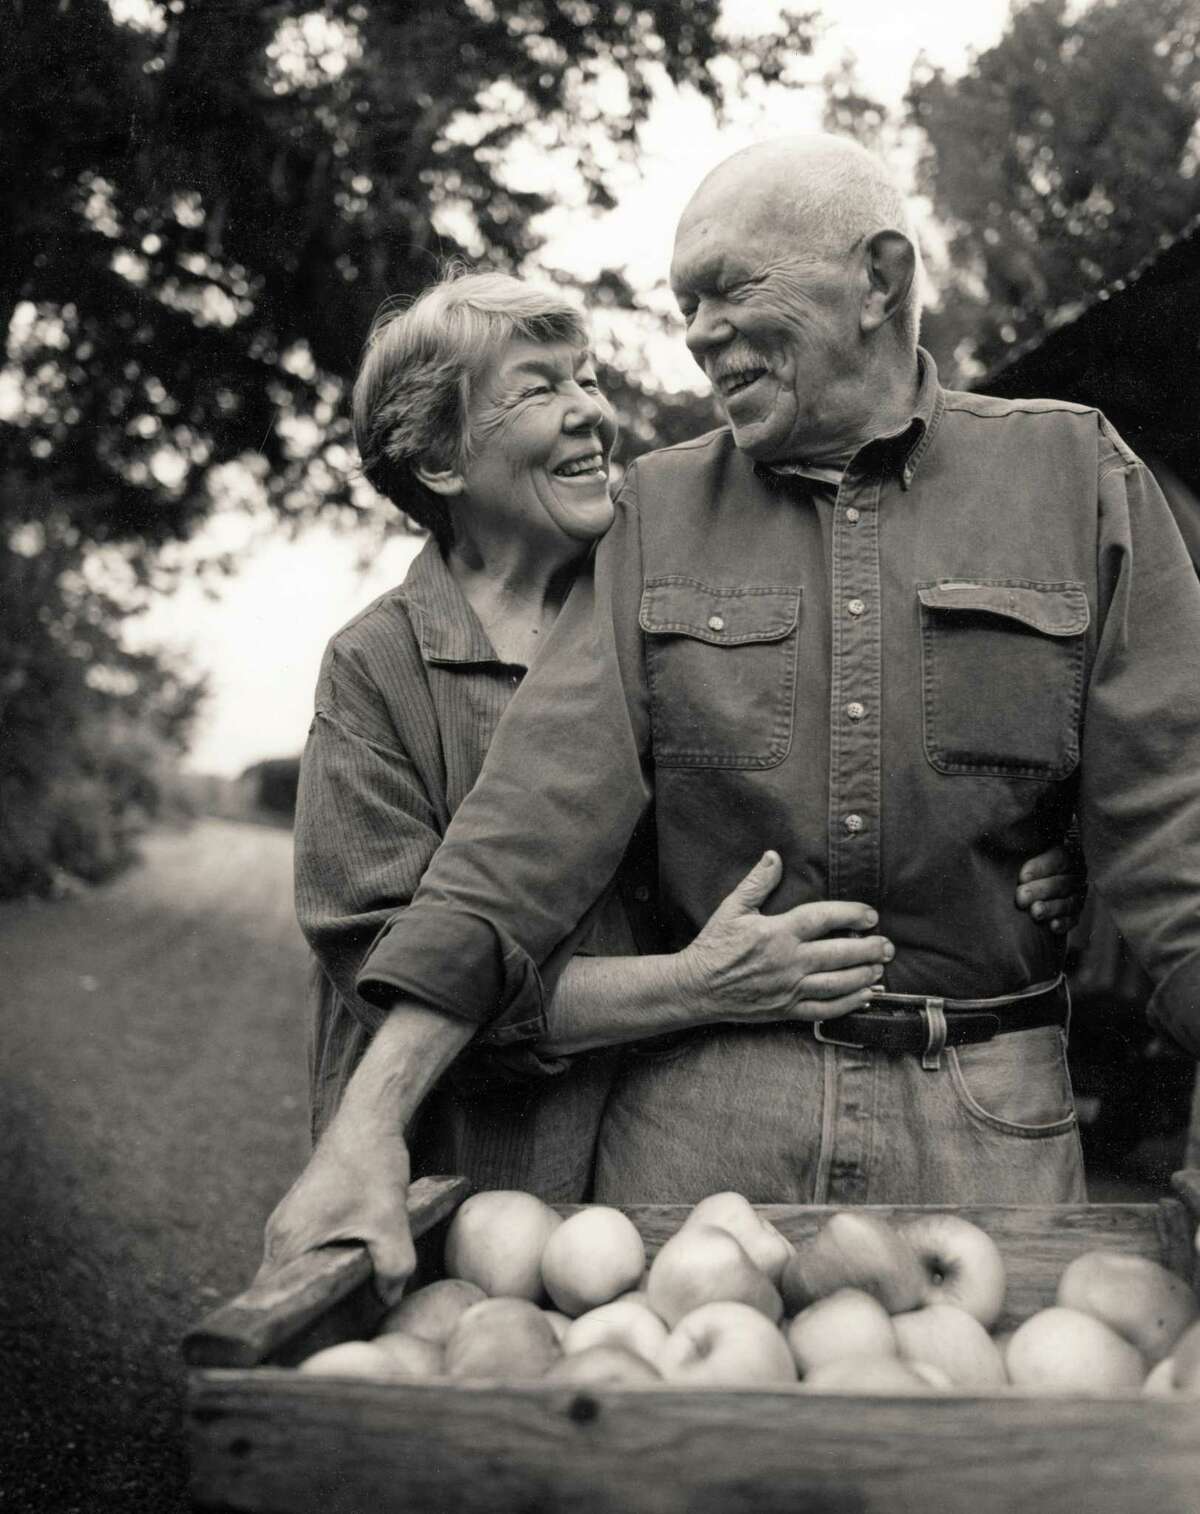 Sally and Don Schmitt are the founders of the French Laundry.